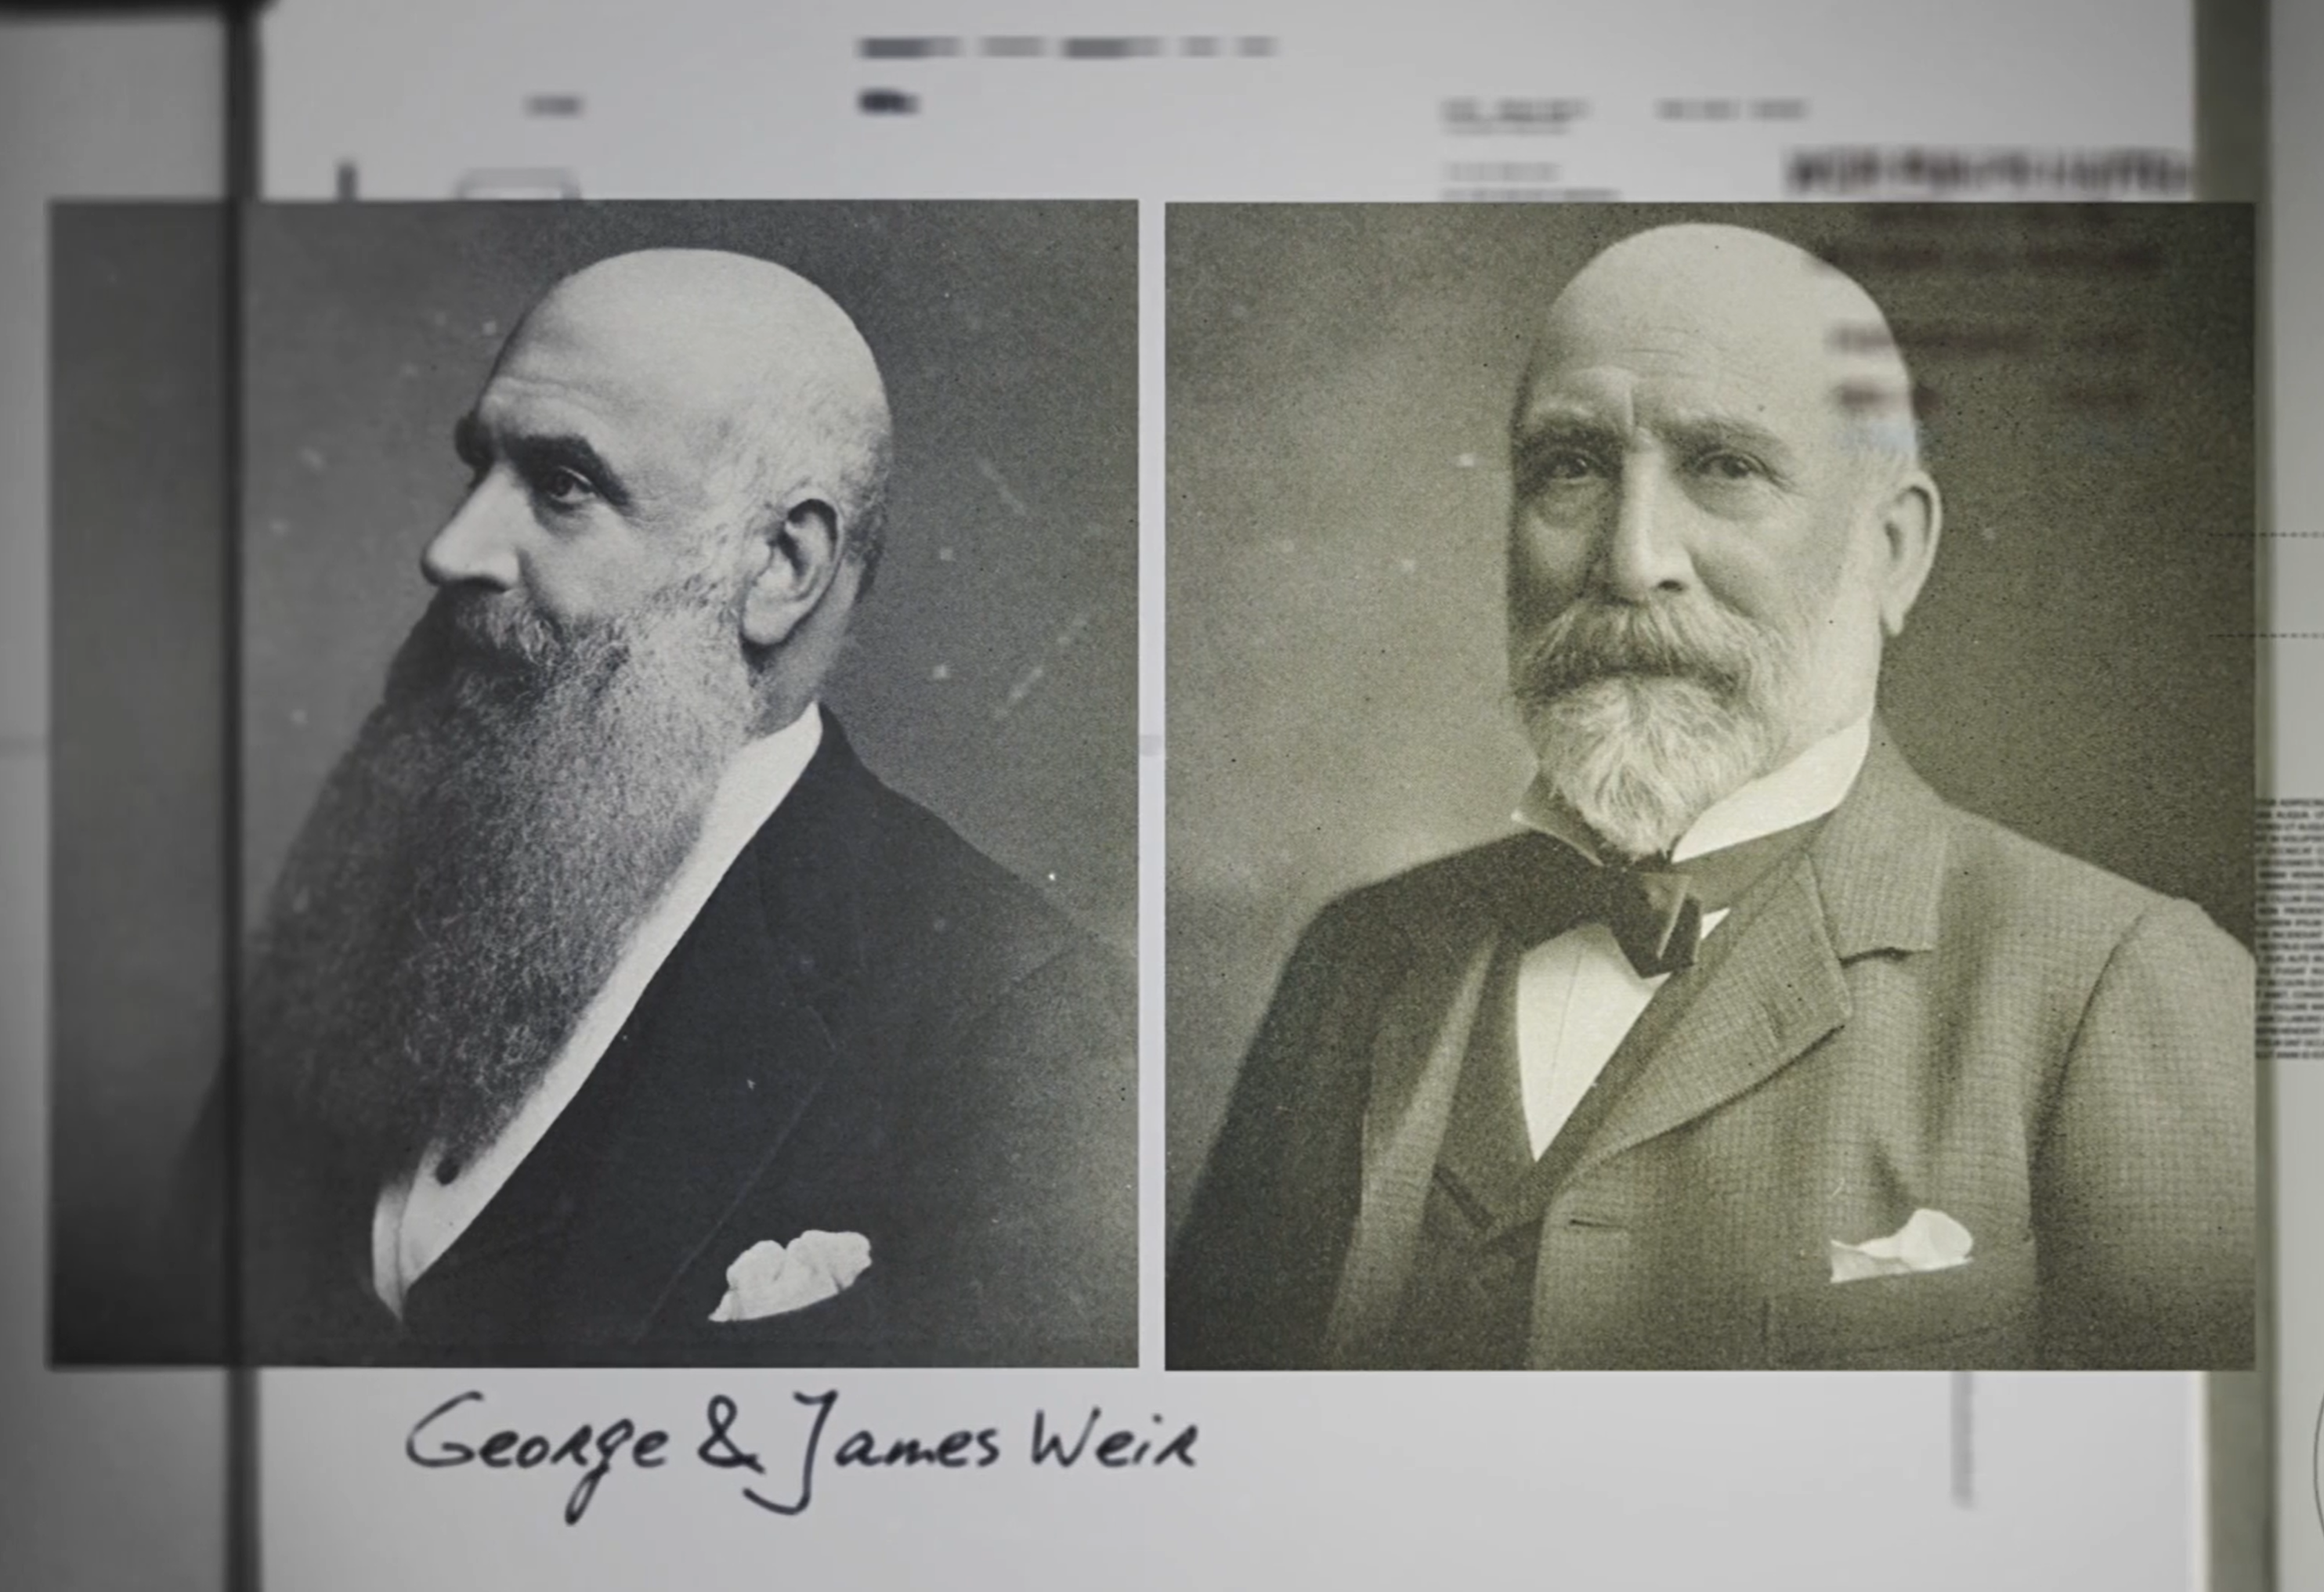 George and James Weir